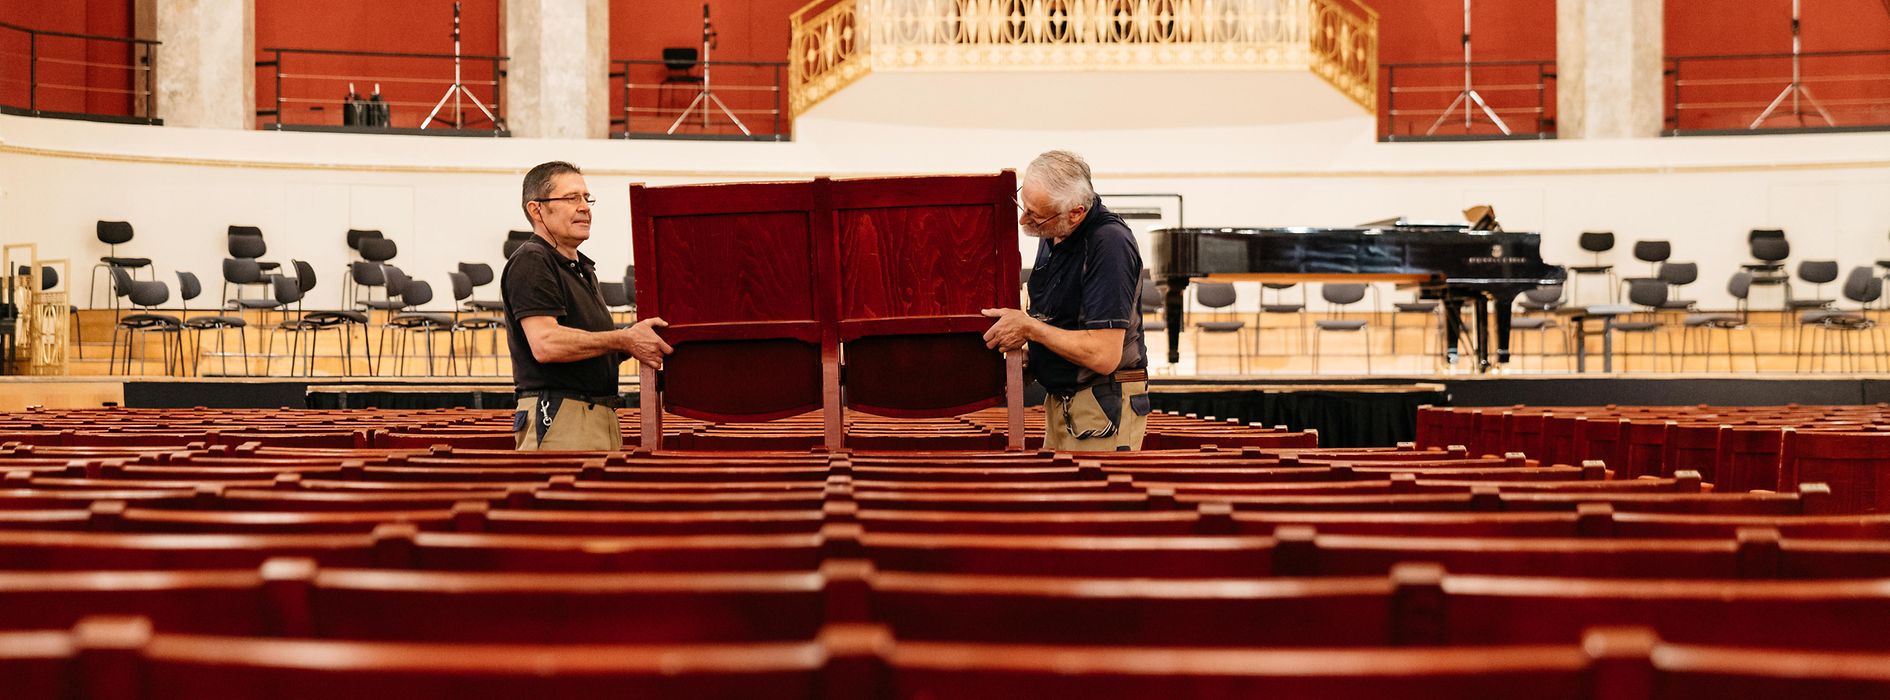 Wolfgang Becker and Franz Risavy, carpenters at the Wiener Konzerthaus, lift a bench in the Great Hall